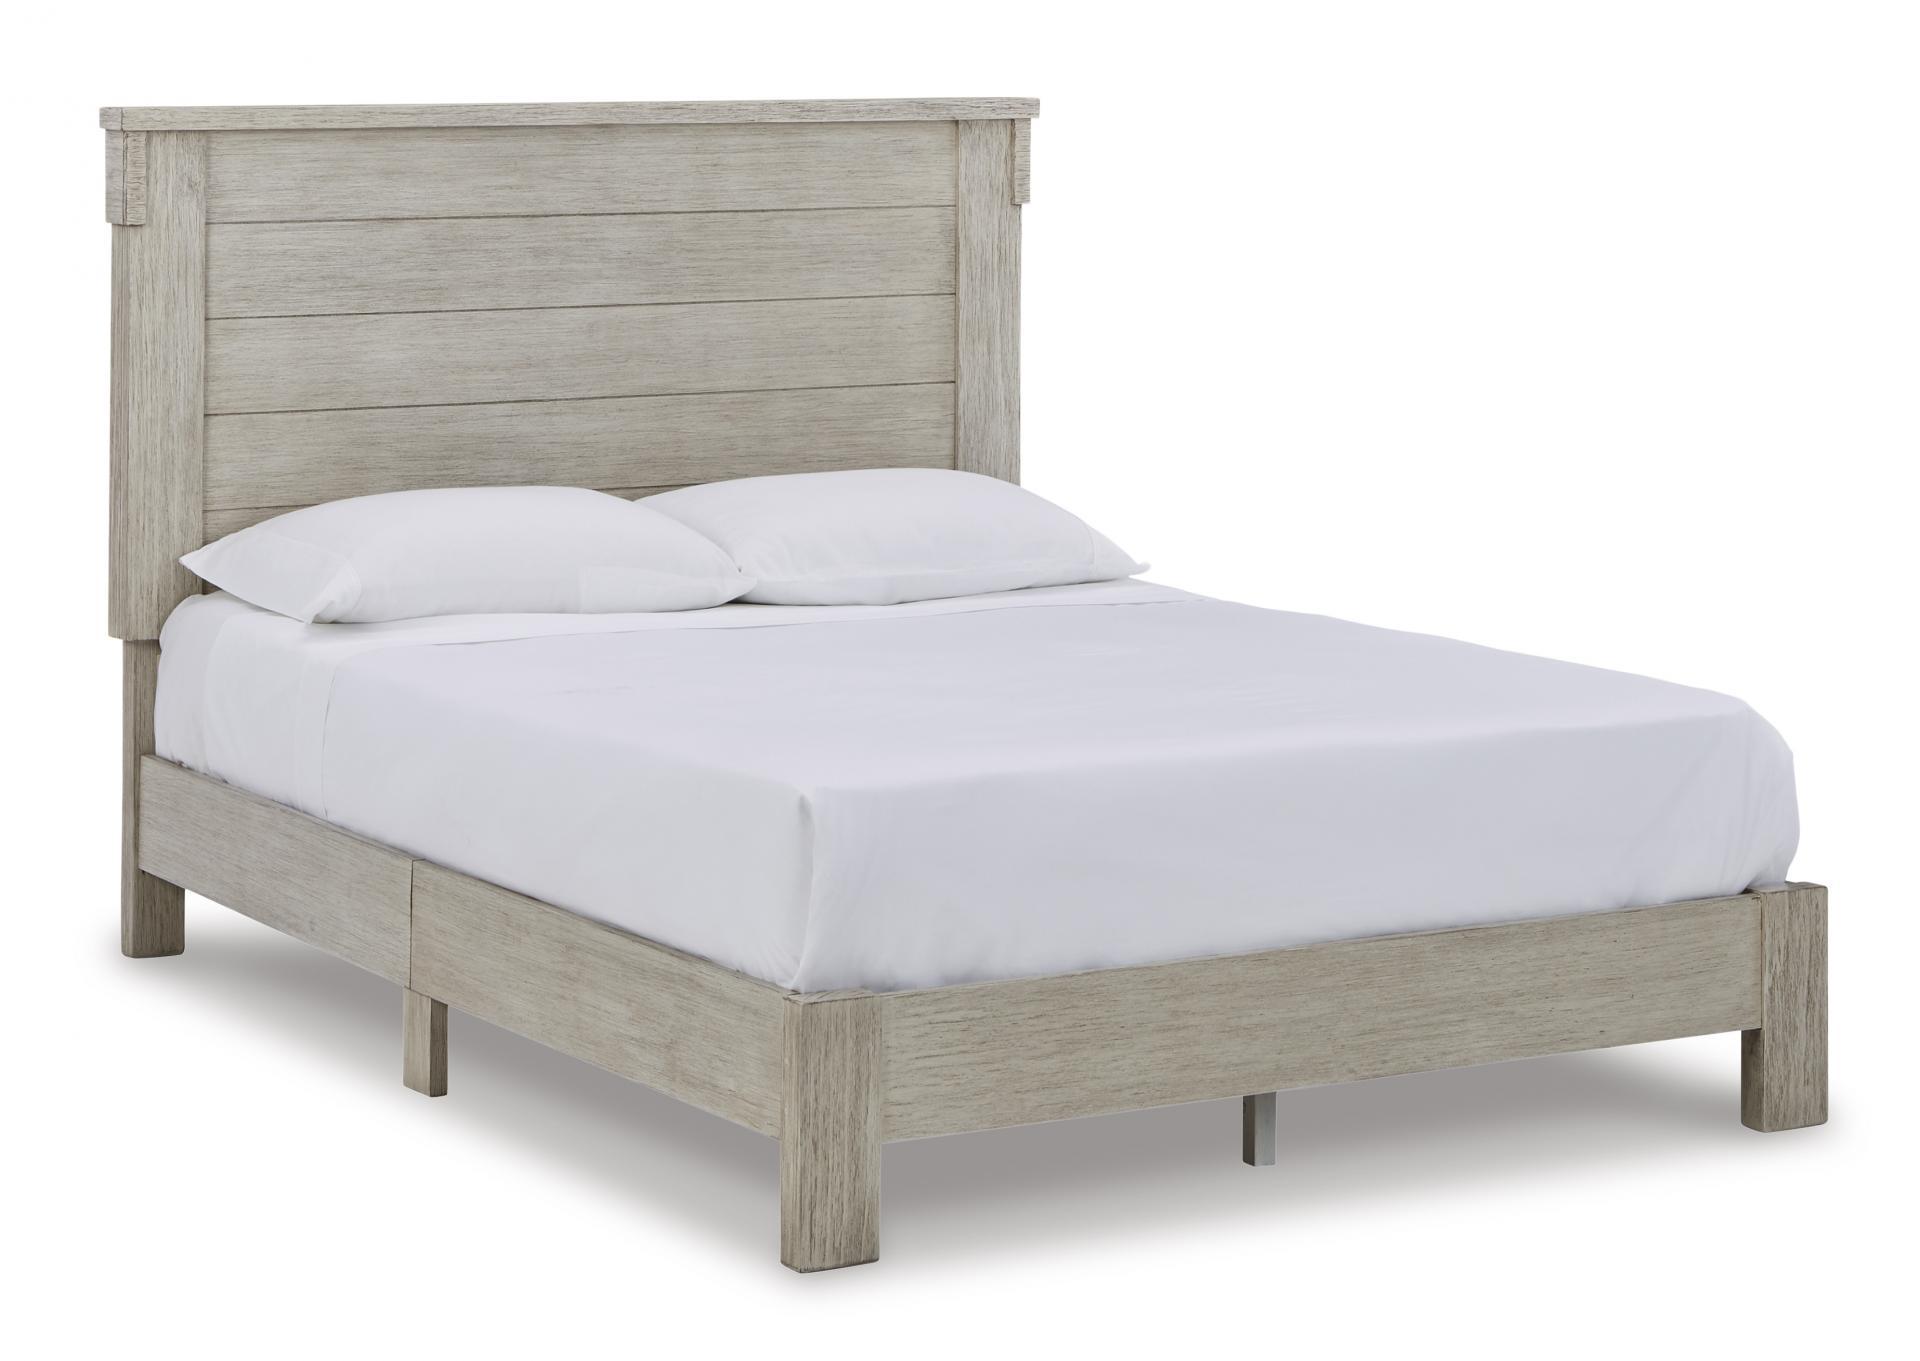 Hollentown Full Size Bed with rails,In Store